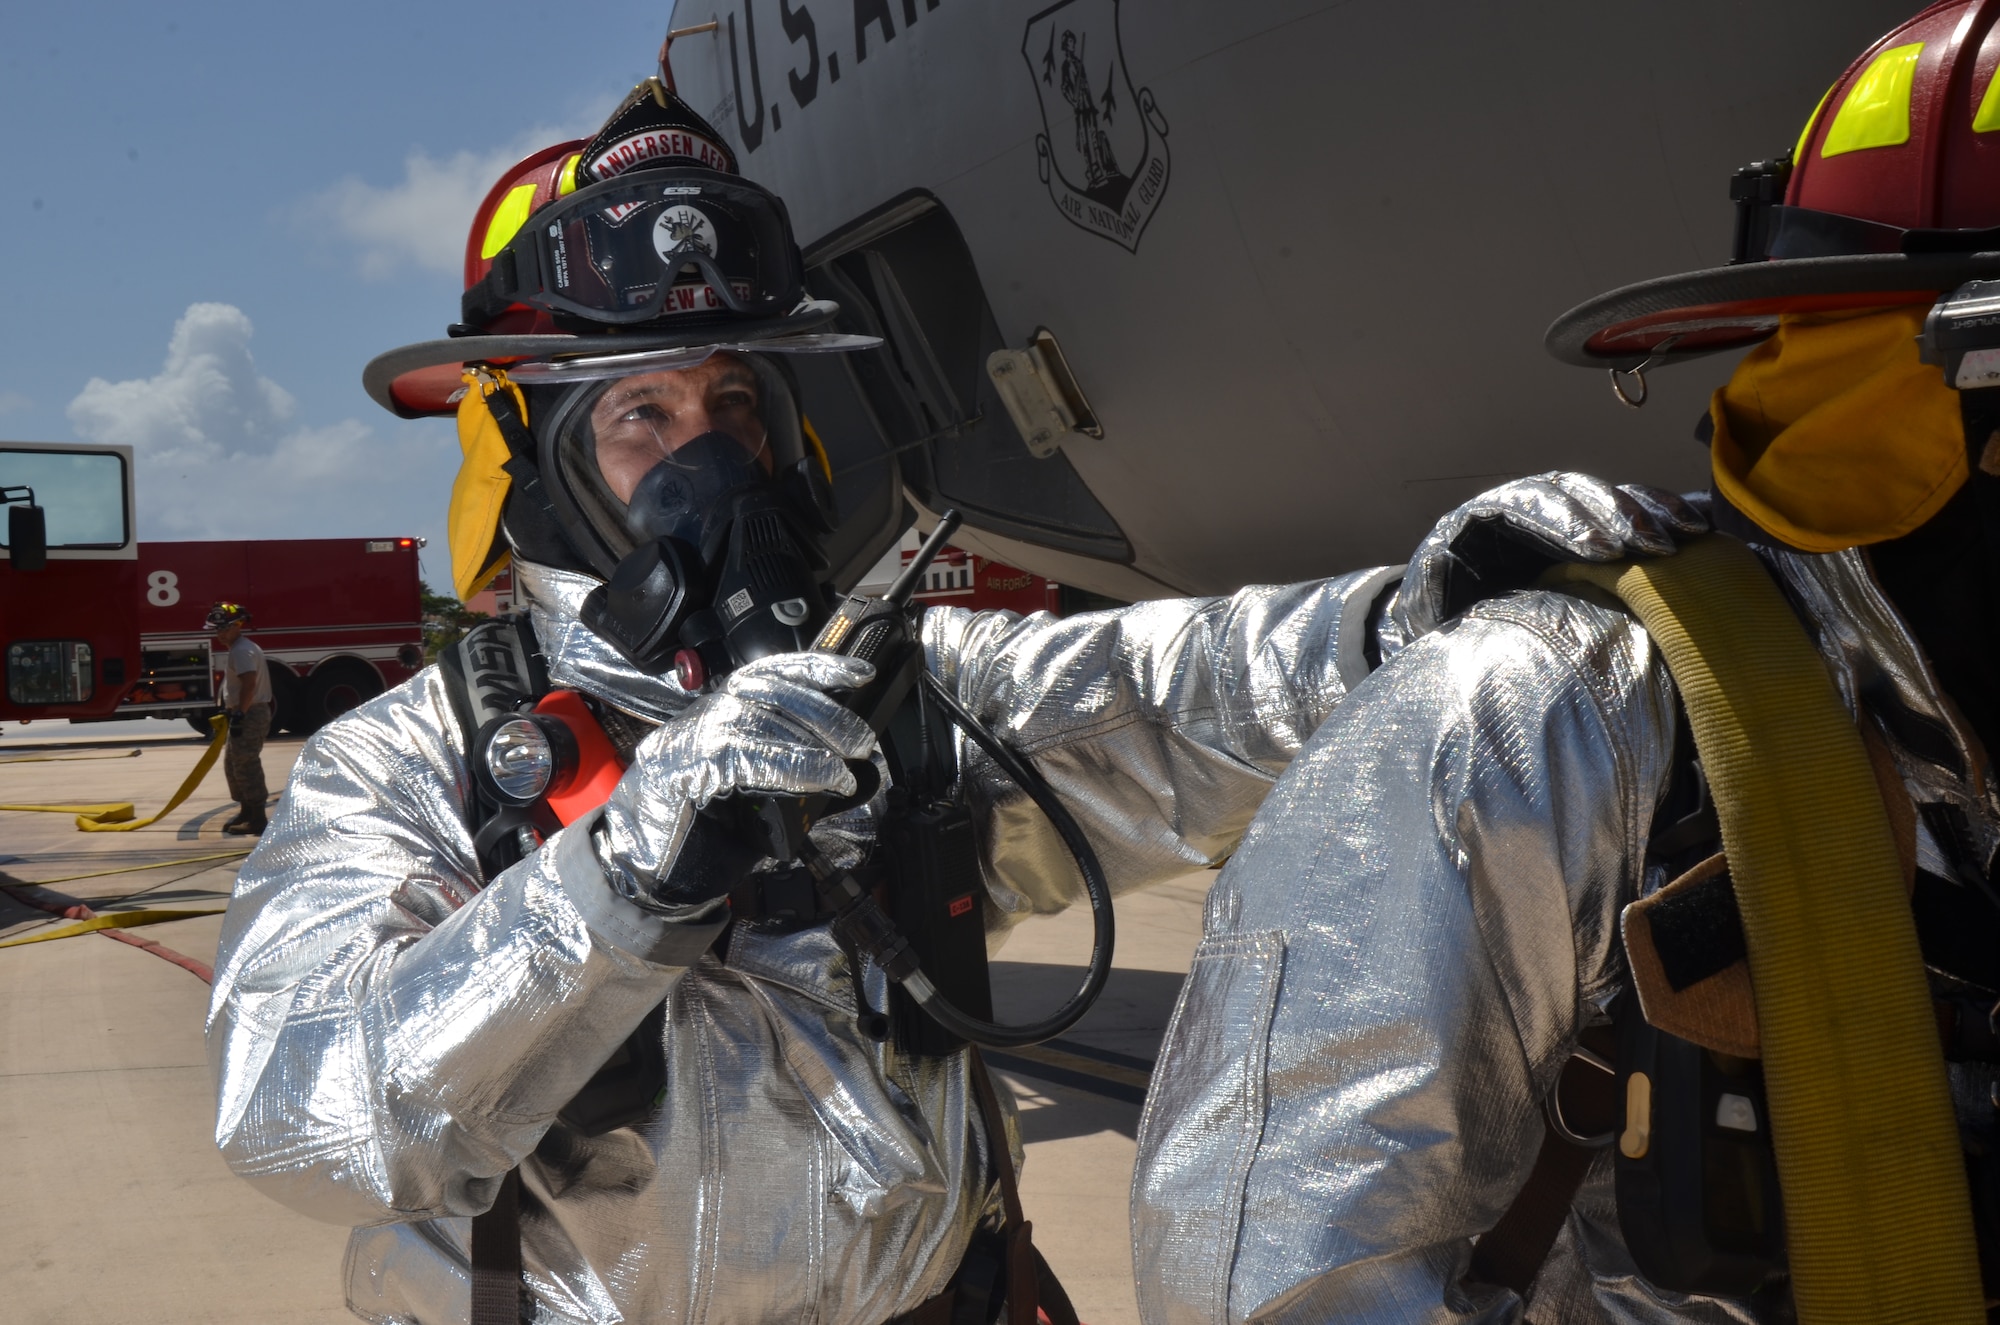 Tech. Sgt. Arnold Castro, 36th Civil Engineer Squadron Fire and Emergency Services station captain, participates in an aircraft fire training exercise on Andersen Air Force Base, Guam, April, 4, 2013. Castro was awarded Navy Fire and Emergency Services Military Firefighter of the Year for 2012. (U.S. Air Force photo by Staff Sgt. Veronica McMahon/Released)